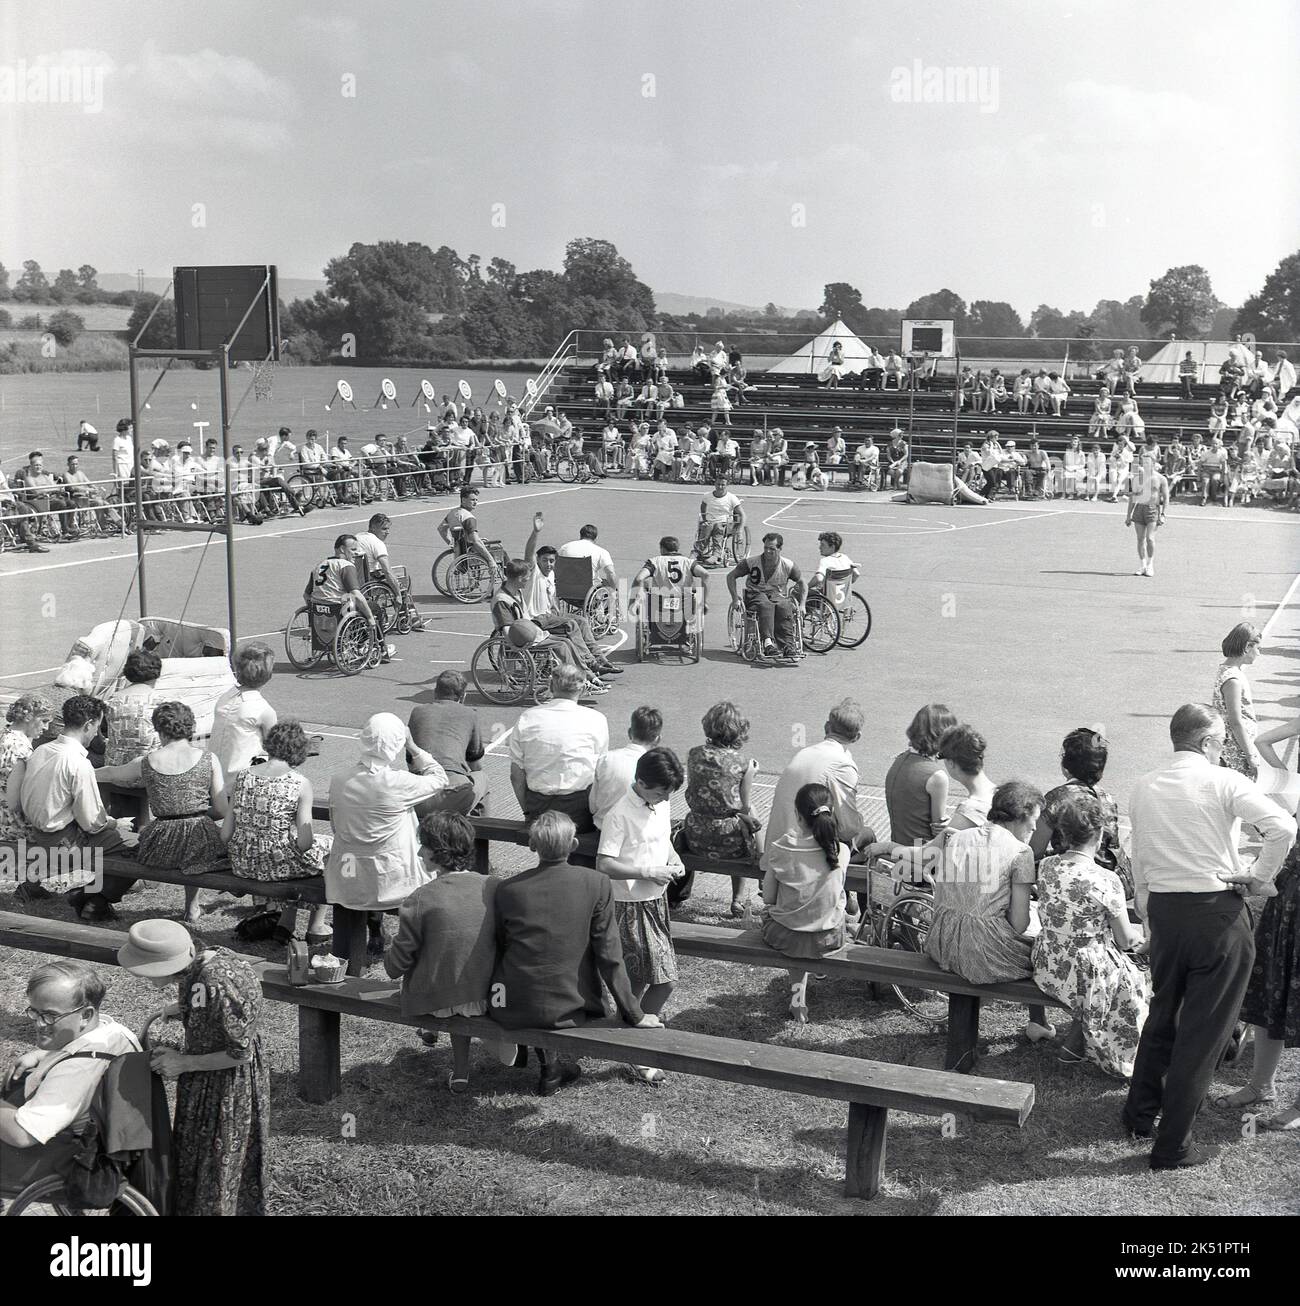 1964, historical, in the grounds of Stoke Mandeville Hospital, home of the National Spinal Injuries Centre, spectators watch wheelchair athletes compete in a basketball tournament. Stoke Mandeville in Aylesbury, Buckinghamshire, England, UK, was the birthplace of the Paralympic movement. 1948, the year of the post-war London Olympics, saw the first competition for wheelchair athletes, when 16 injured serviceman and women took part in what was known as the Stoke Mandeville Games, which later became the Paralympic Games. Stock Photo